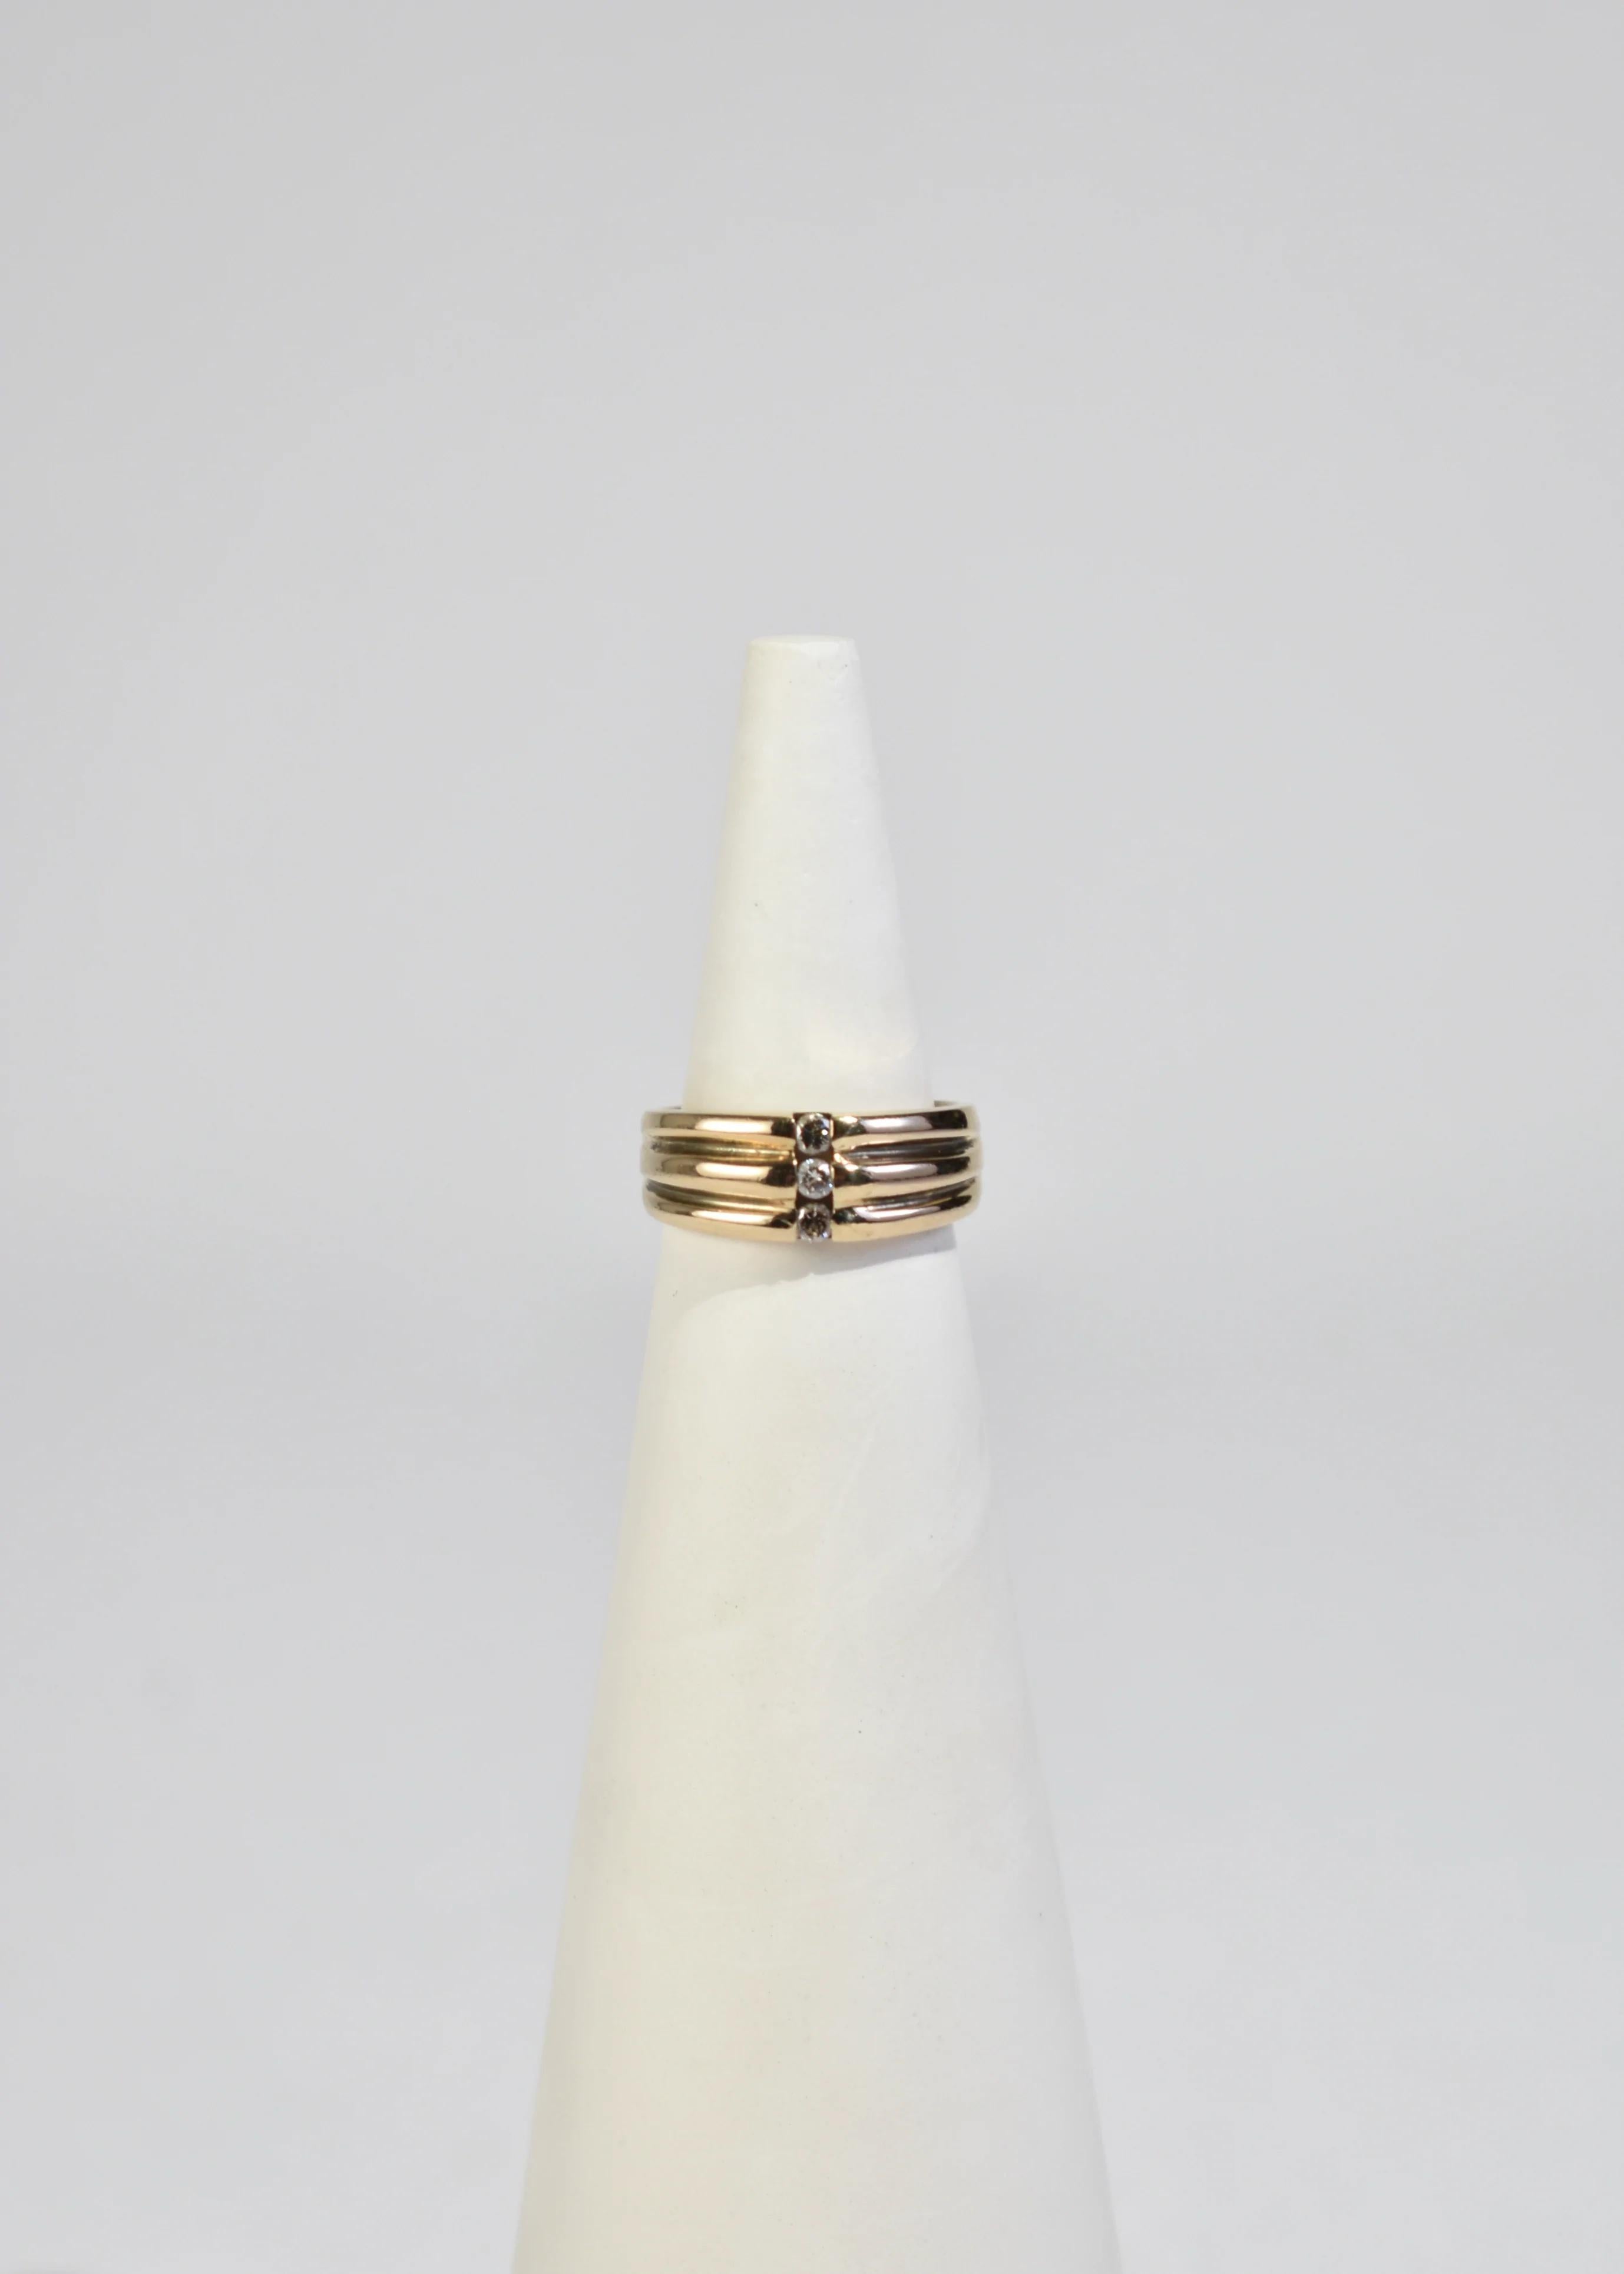 Stunning vintage gold ring with ribbed detail and three diamonds. Stamped 14k.

Material: 14k gold, diamond.

We recommend storing in a dry place and periodic polishing with a cloth. 